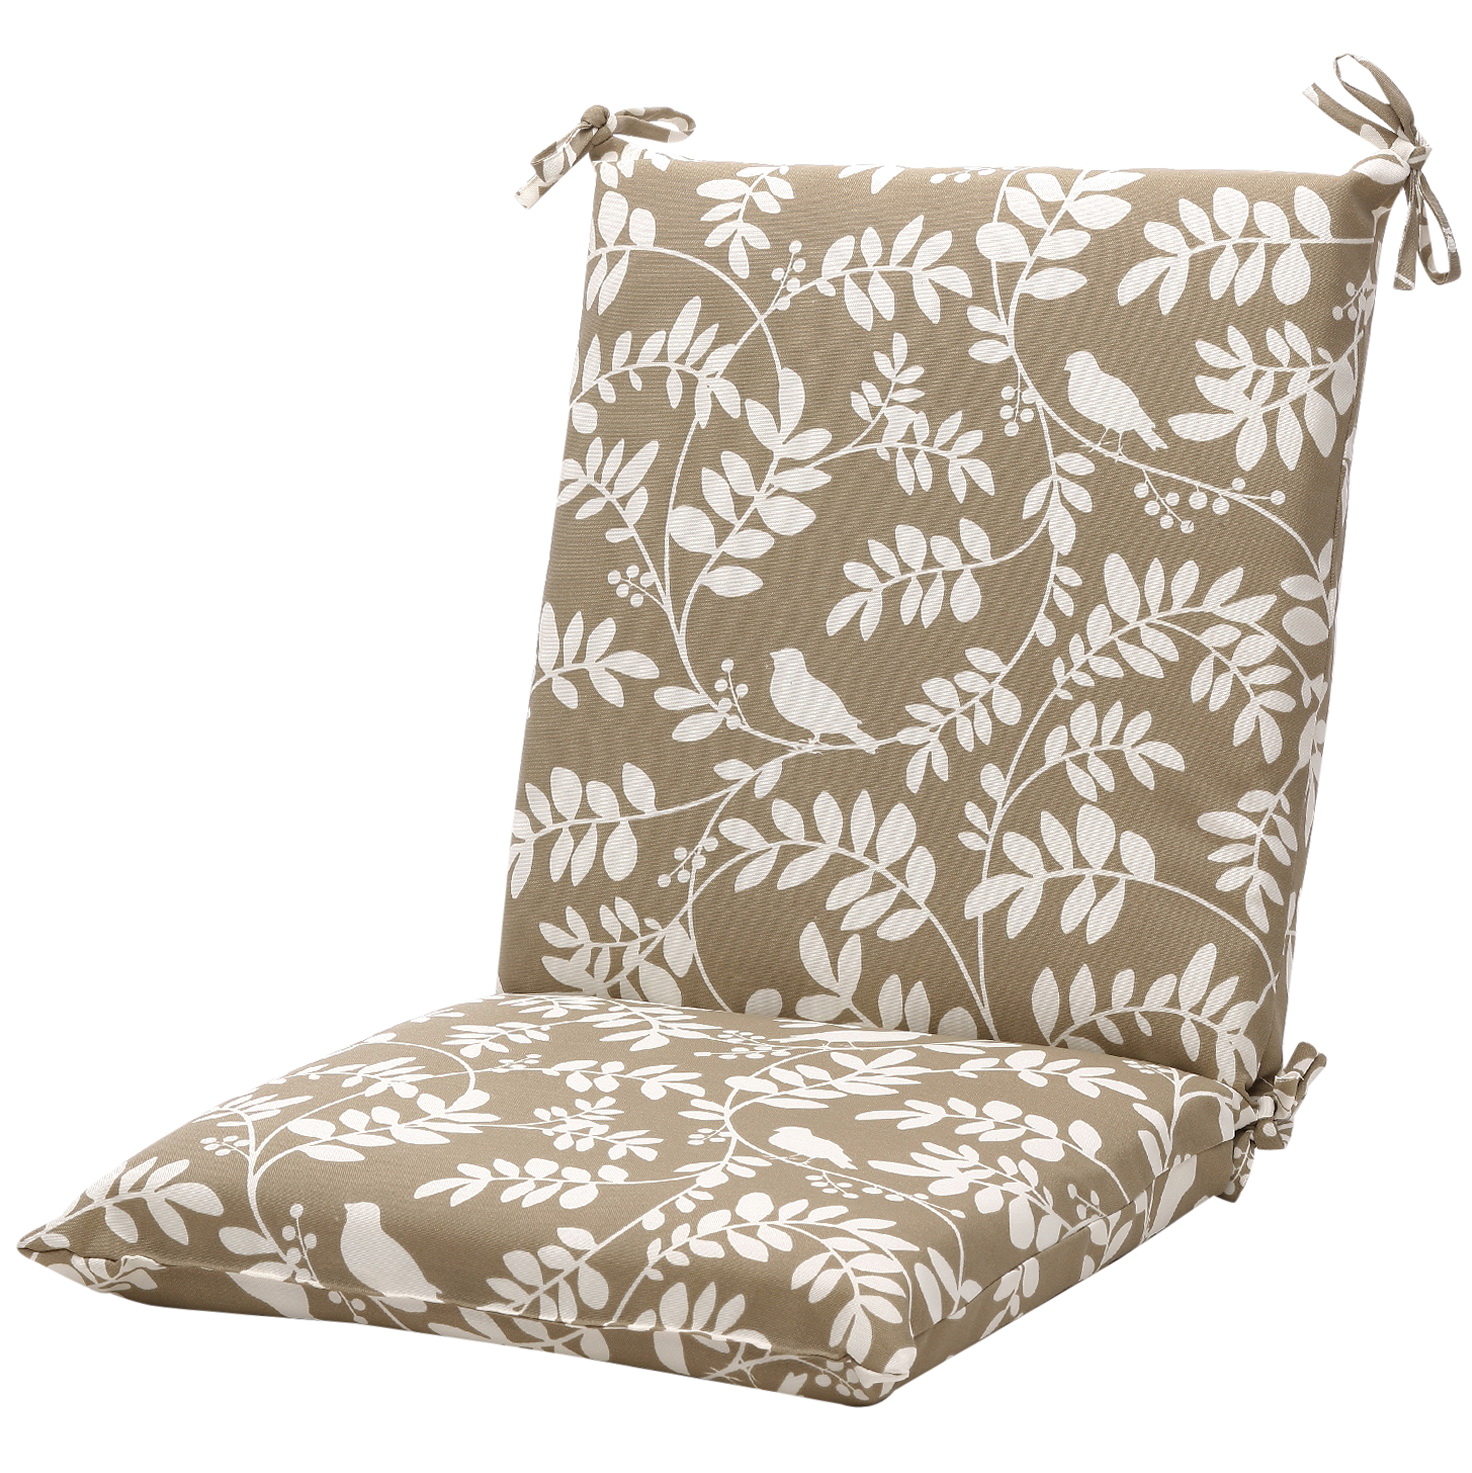 Patio Furniture Cushions Clearance Overstock | Home Design Ideas